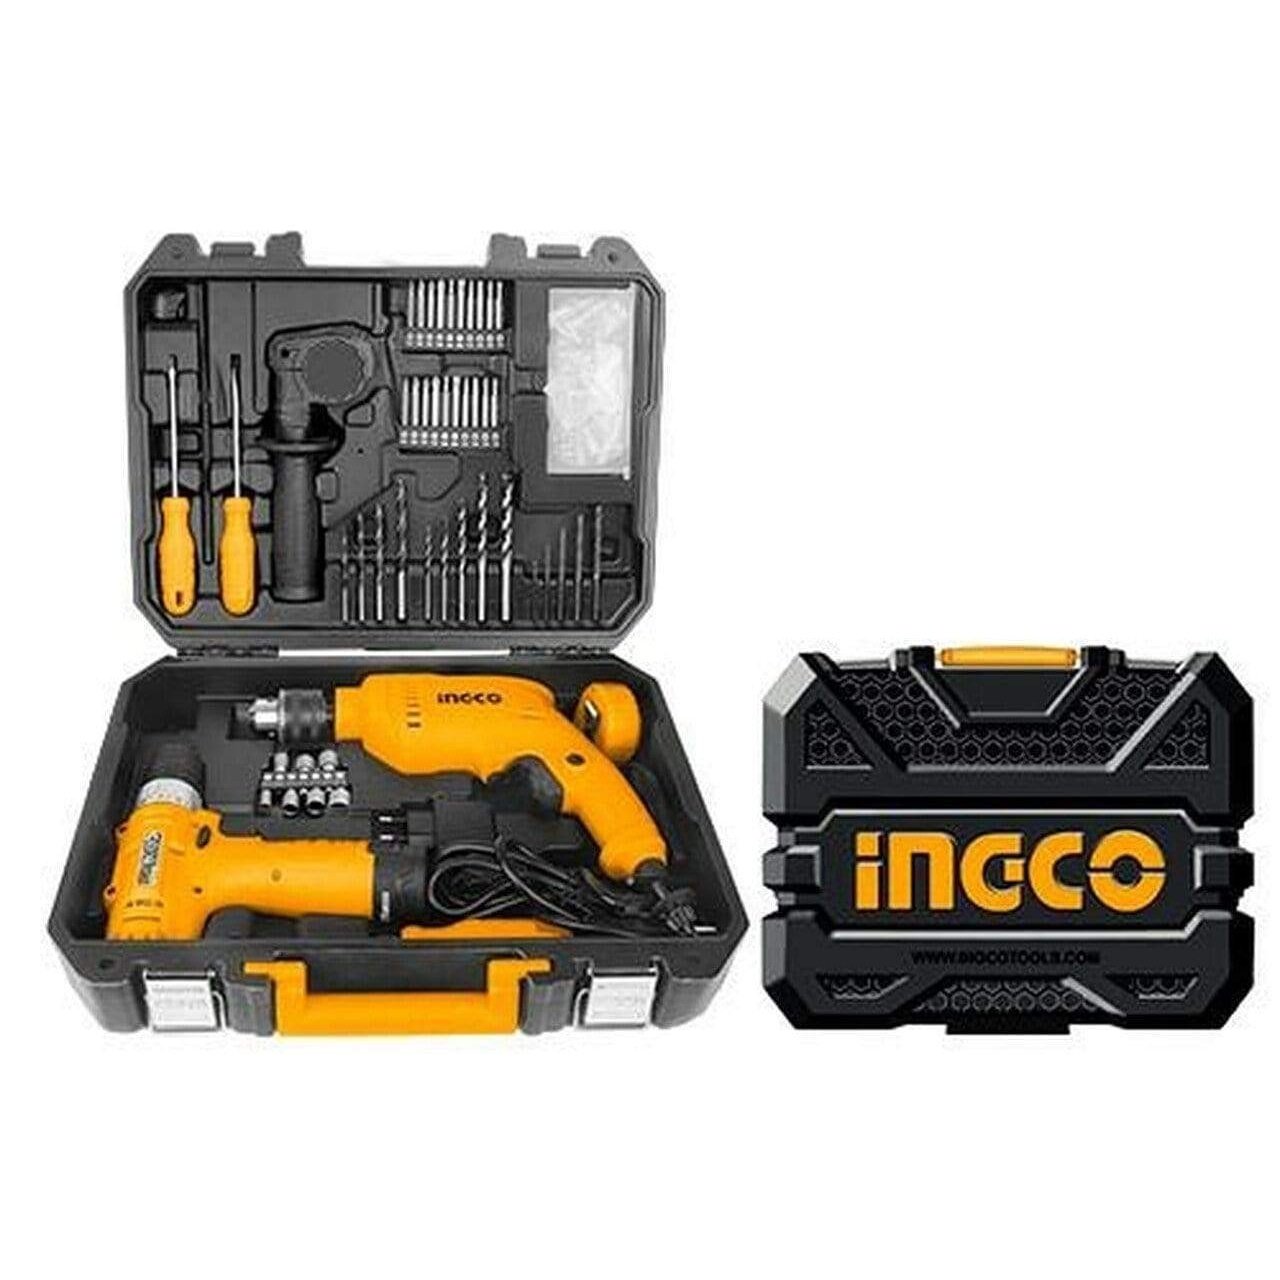 Ingco 108 Pieces Tools Set with 680W Hammer Impact Drill & 12V Li-ion cordless drill - HKTHP11081 | Supply Master | Accra, Ghana Tools Building Steel Engineering Hardware tool